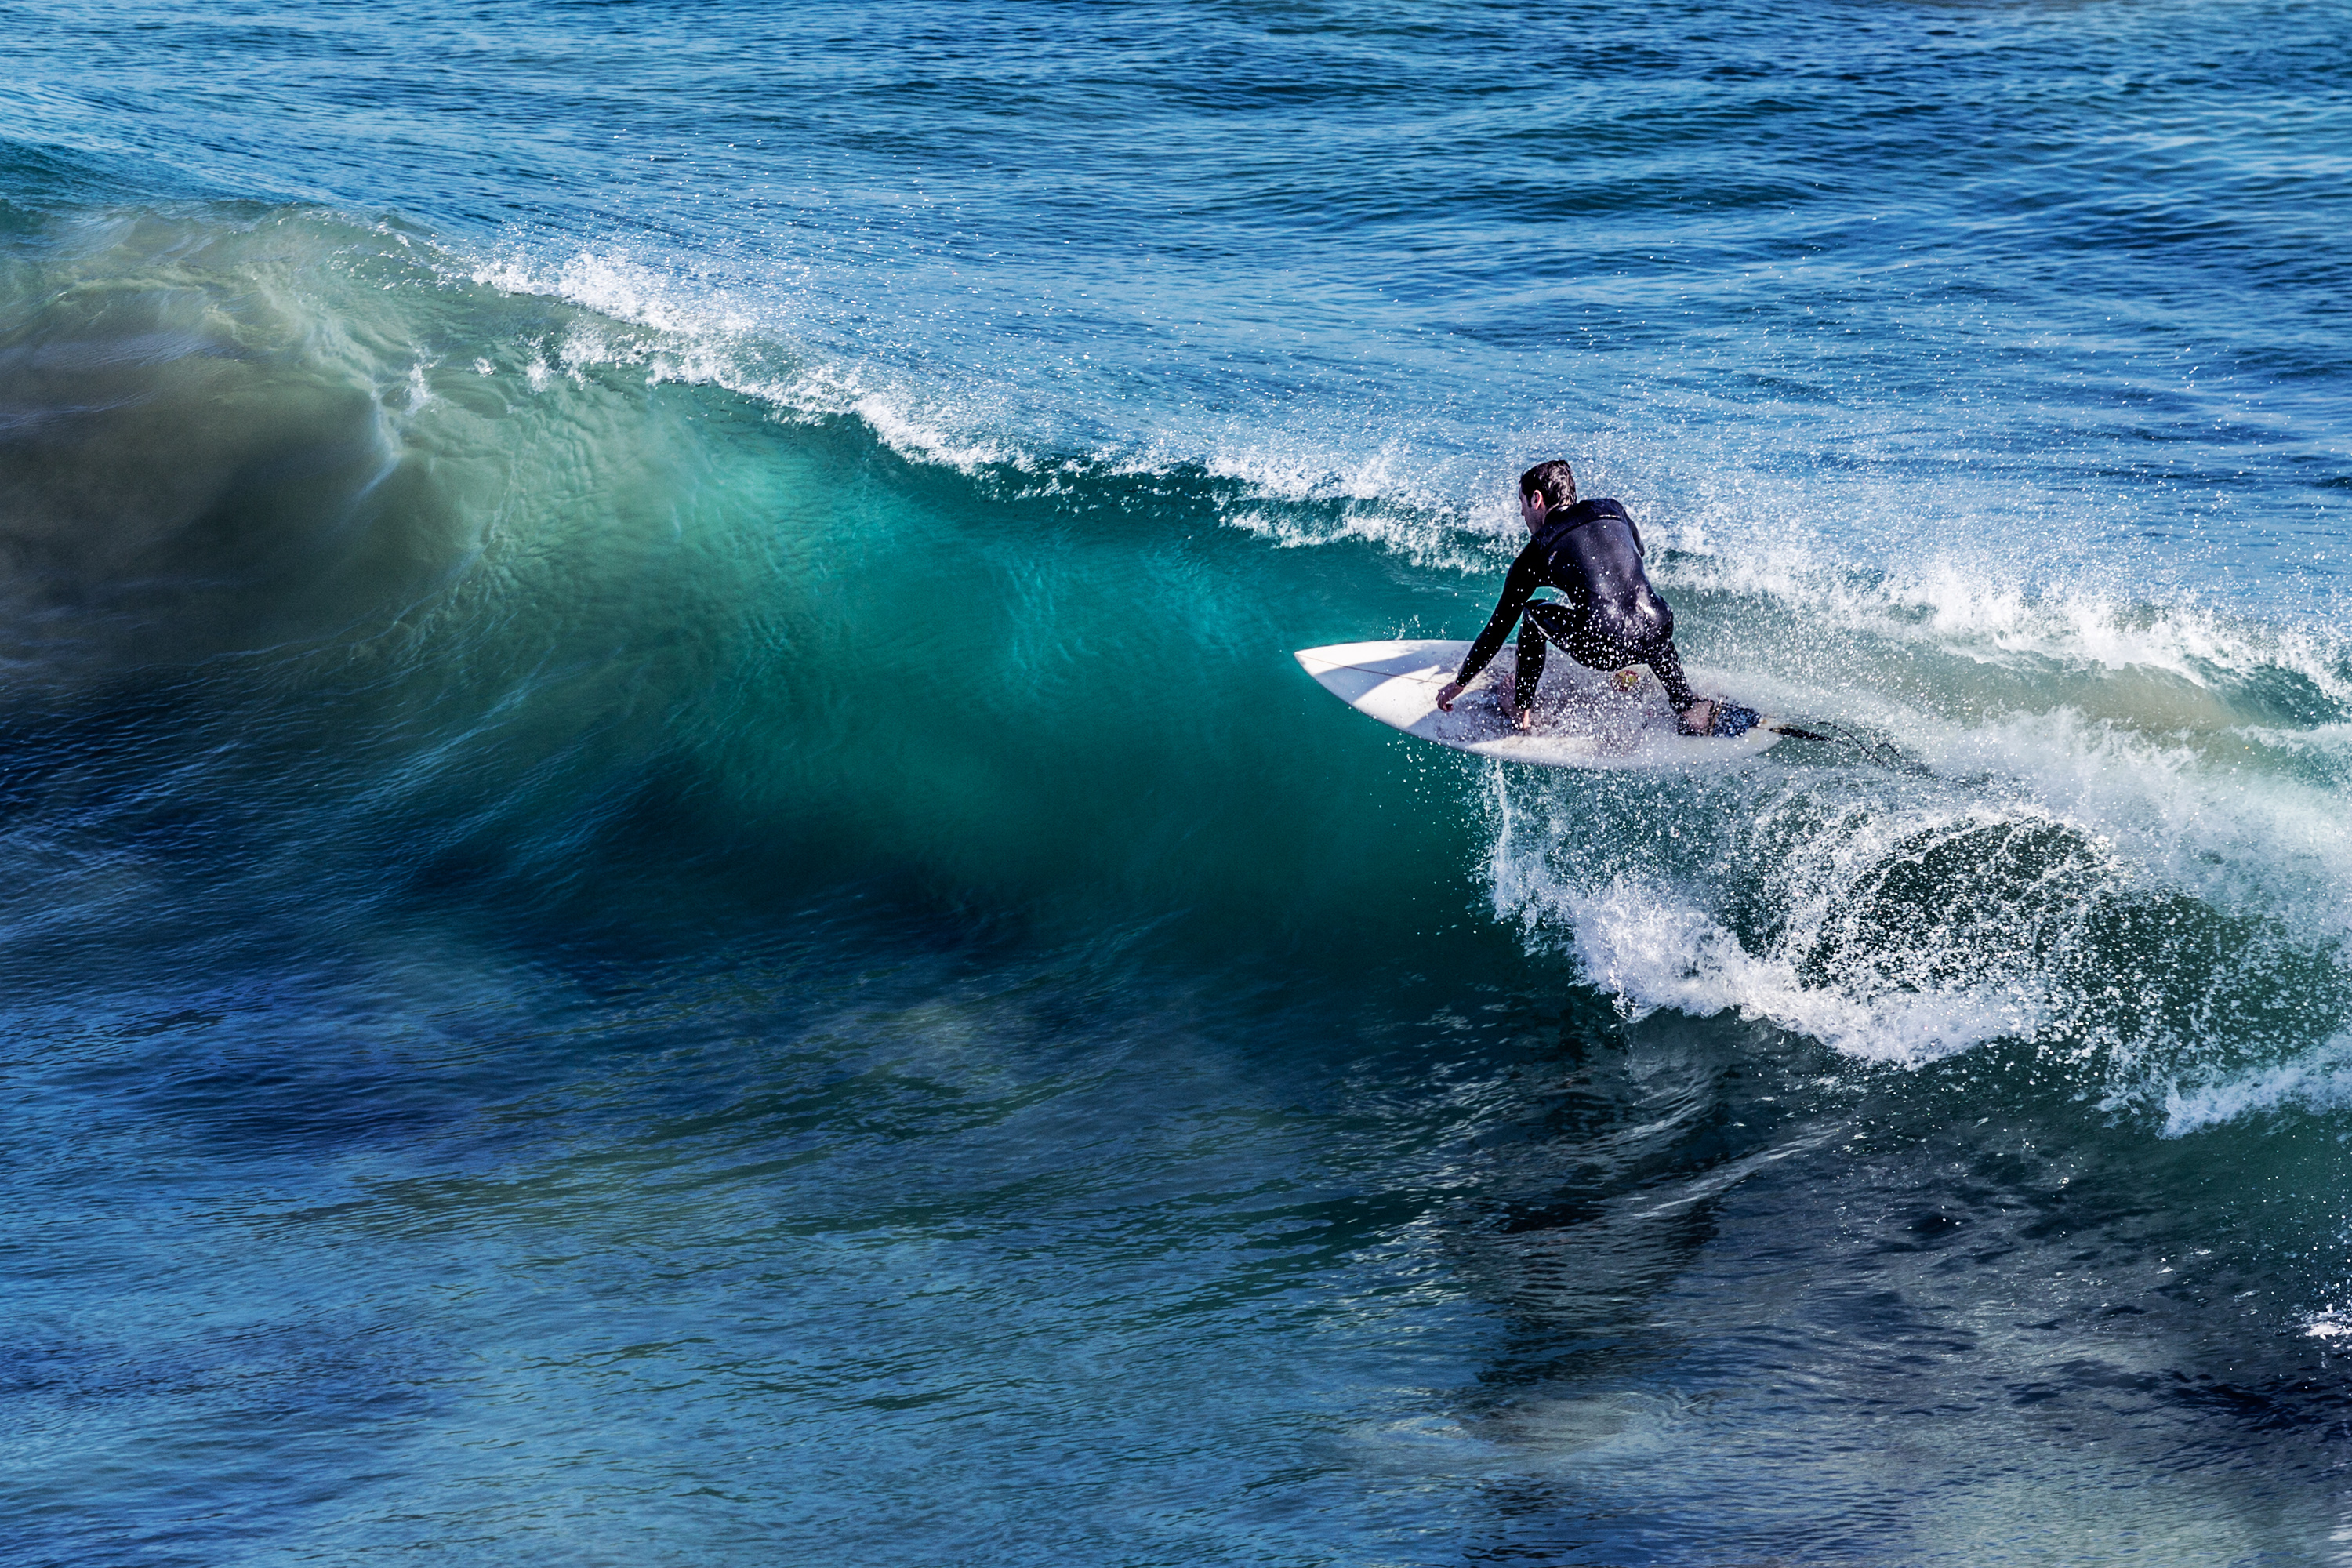 recreational surfer enjoying a wave on the edge of Point Dume SMR